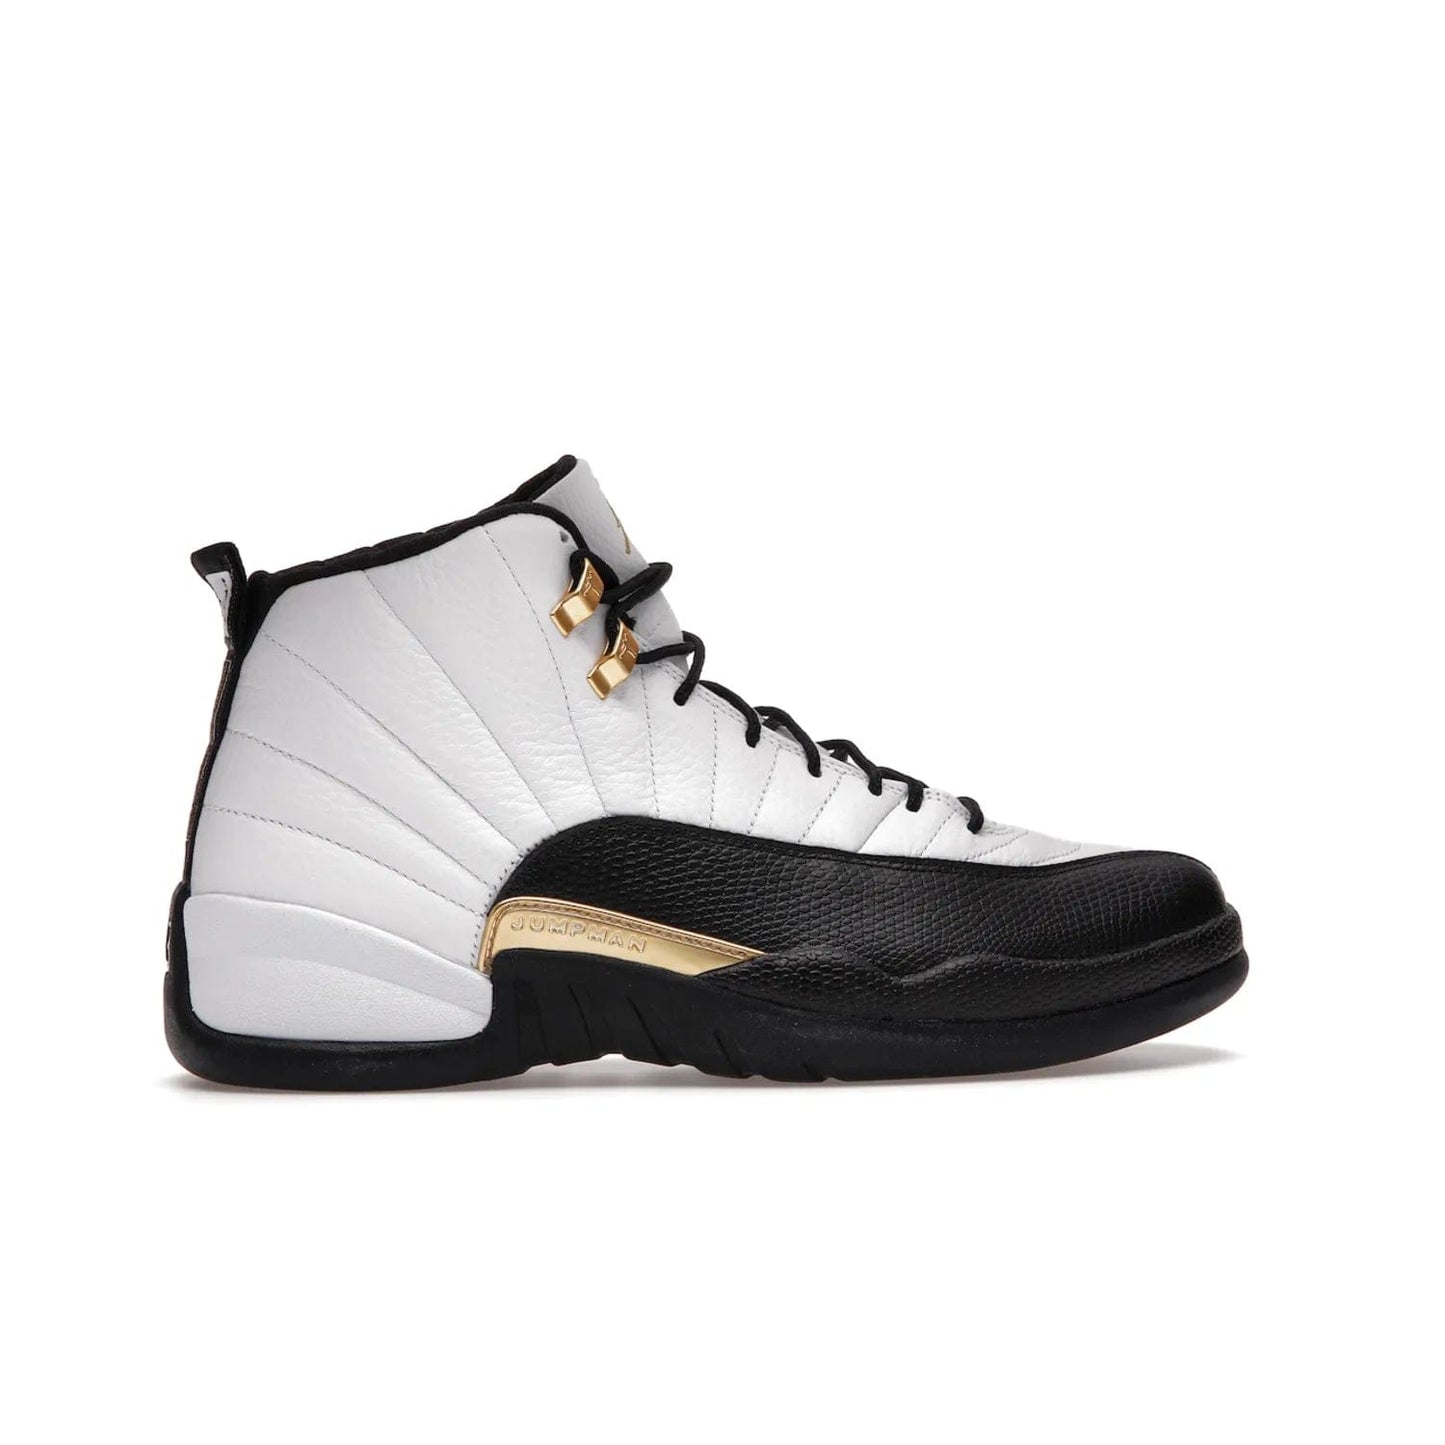 Jordan 12 Retro Royalty Taxi - Image 36 - Only at www.BallersClubKickz.com - Make a statement with the Air Jordan 12 Retro Royalty Taxi. Woven heel tag, gold plaquet, white tumbled leather upper plus a black toe wrap, make this modern take on the classic a must-have. Available in November 2021.